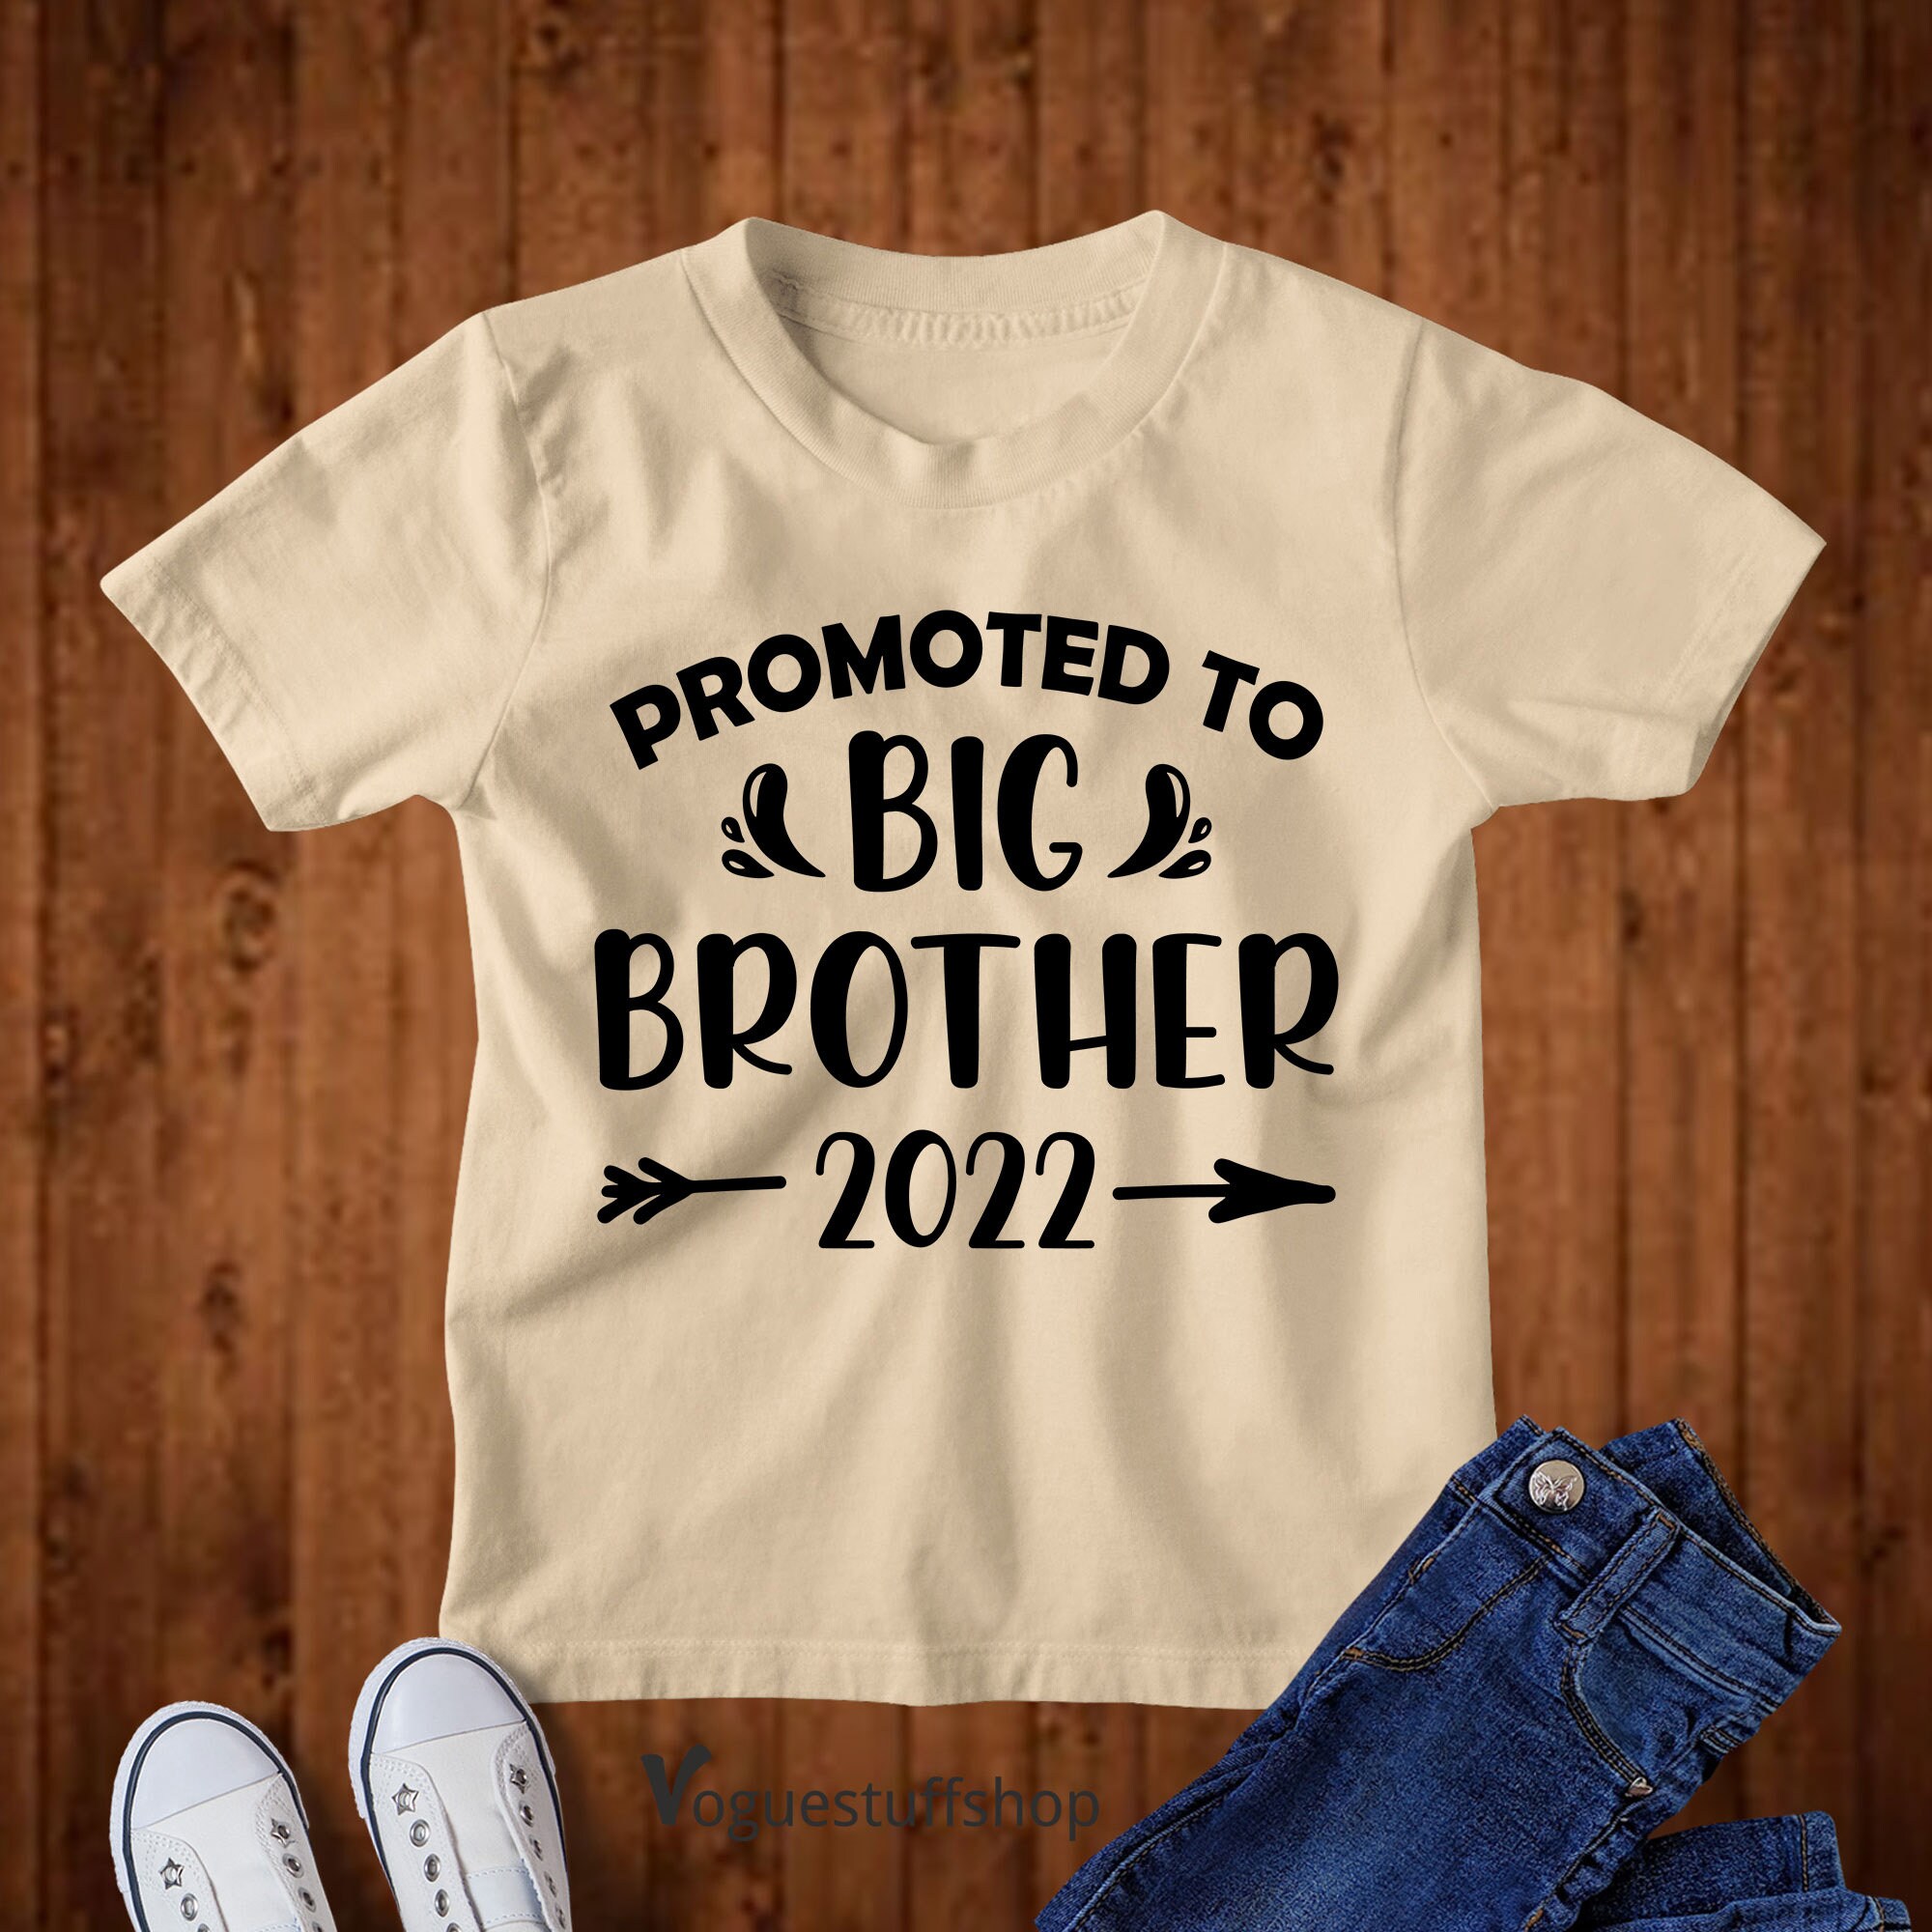 I Have Been Promoted To Big Brother T-Shirt Boys Age 3-13 Ideal Gift/Present 